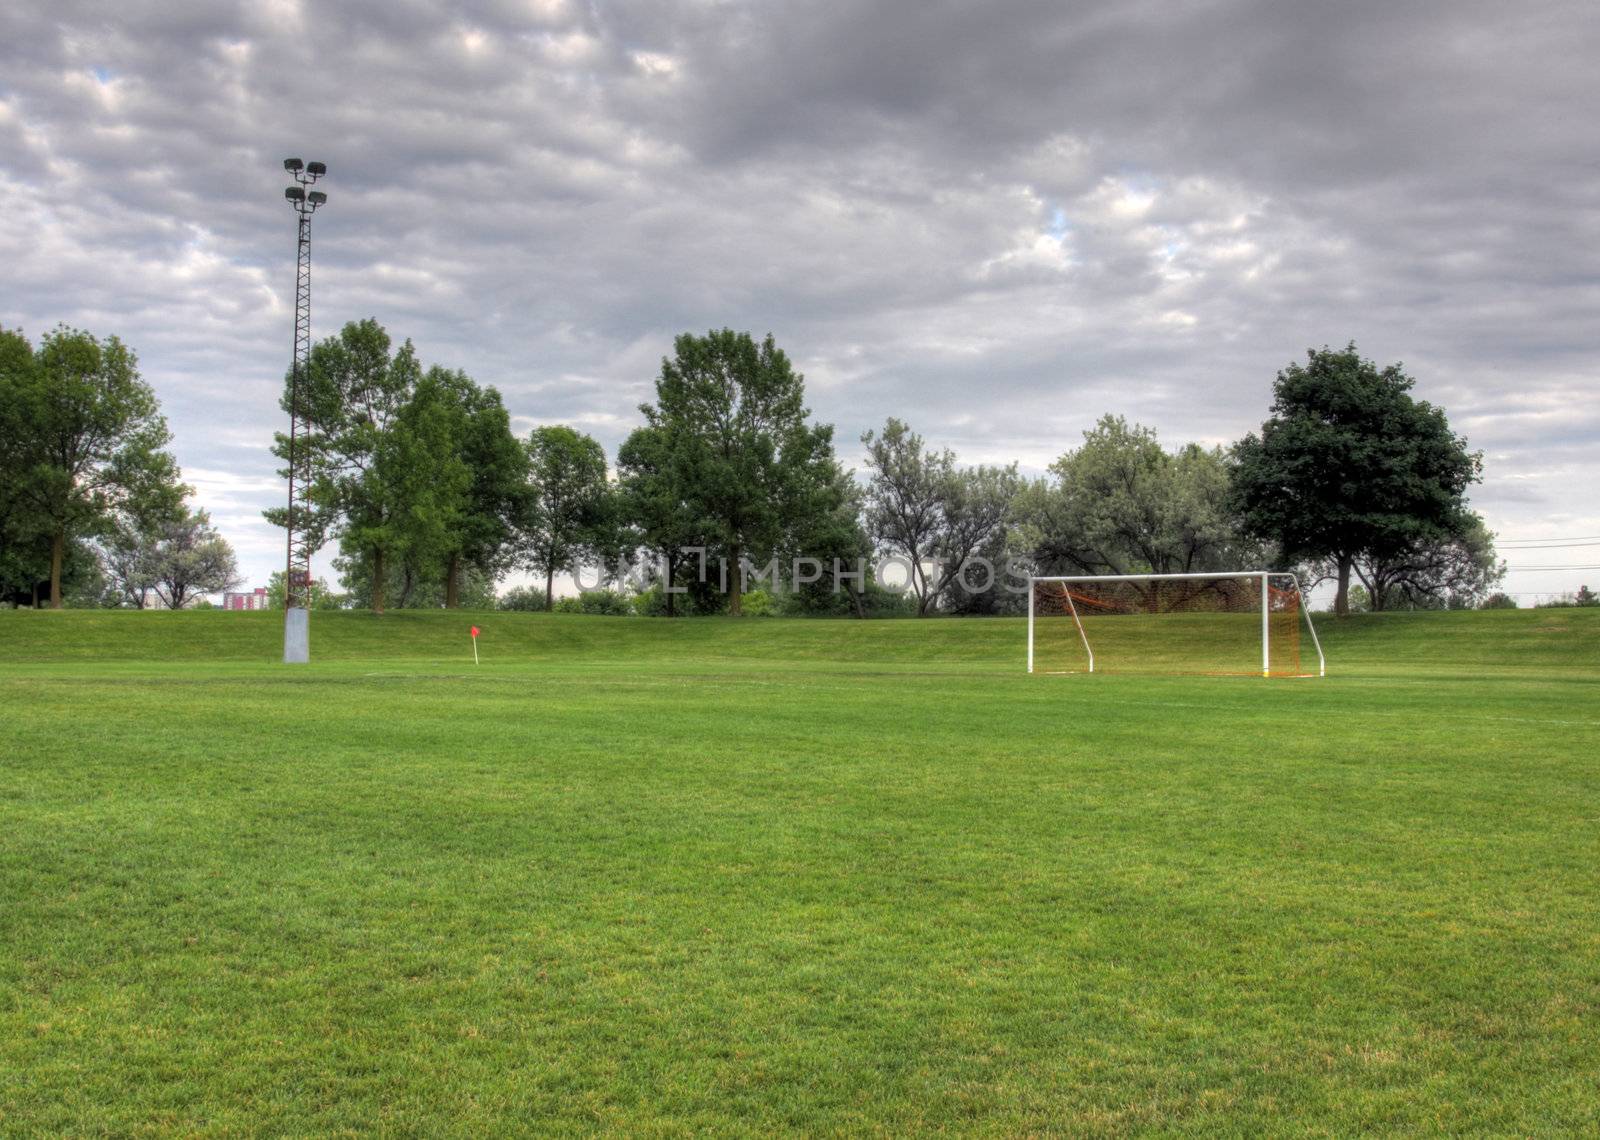 Overcast Soccer Field
 by ca2hill